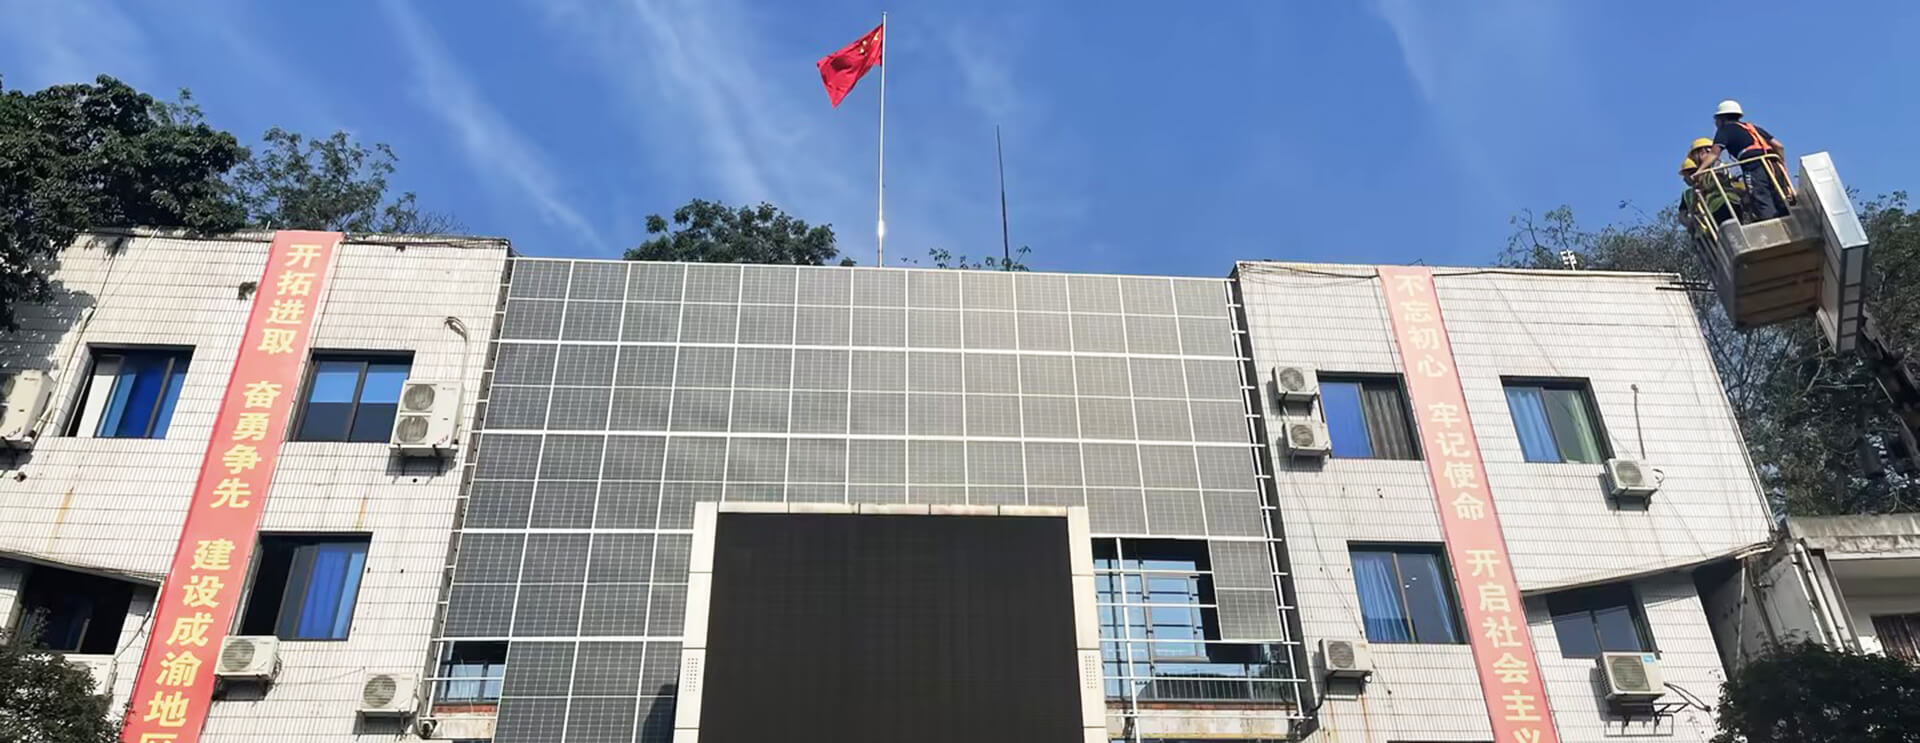 Rongchang District Wujia Town Government Distributed Photovoltaic Curtain Wall Project Completed